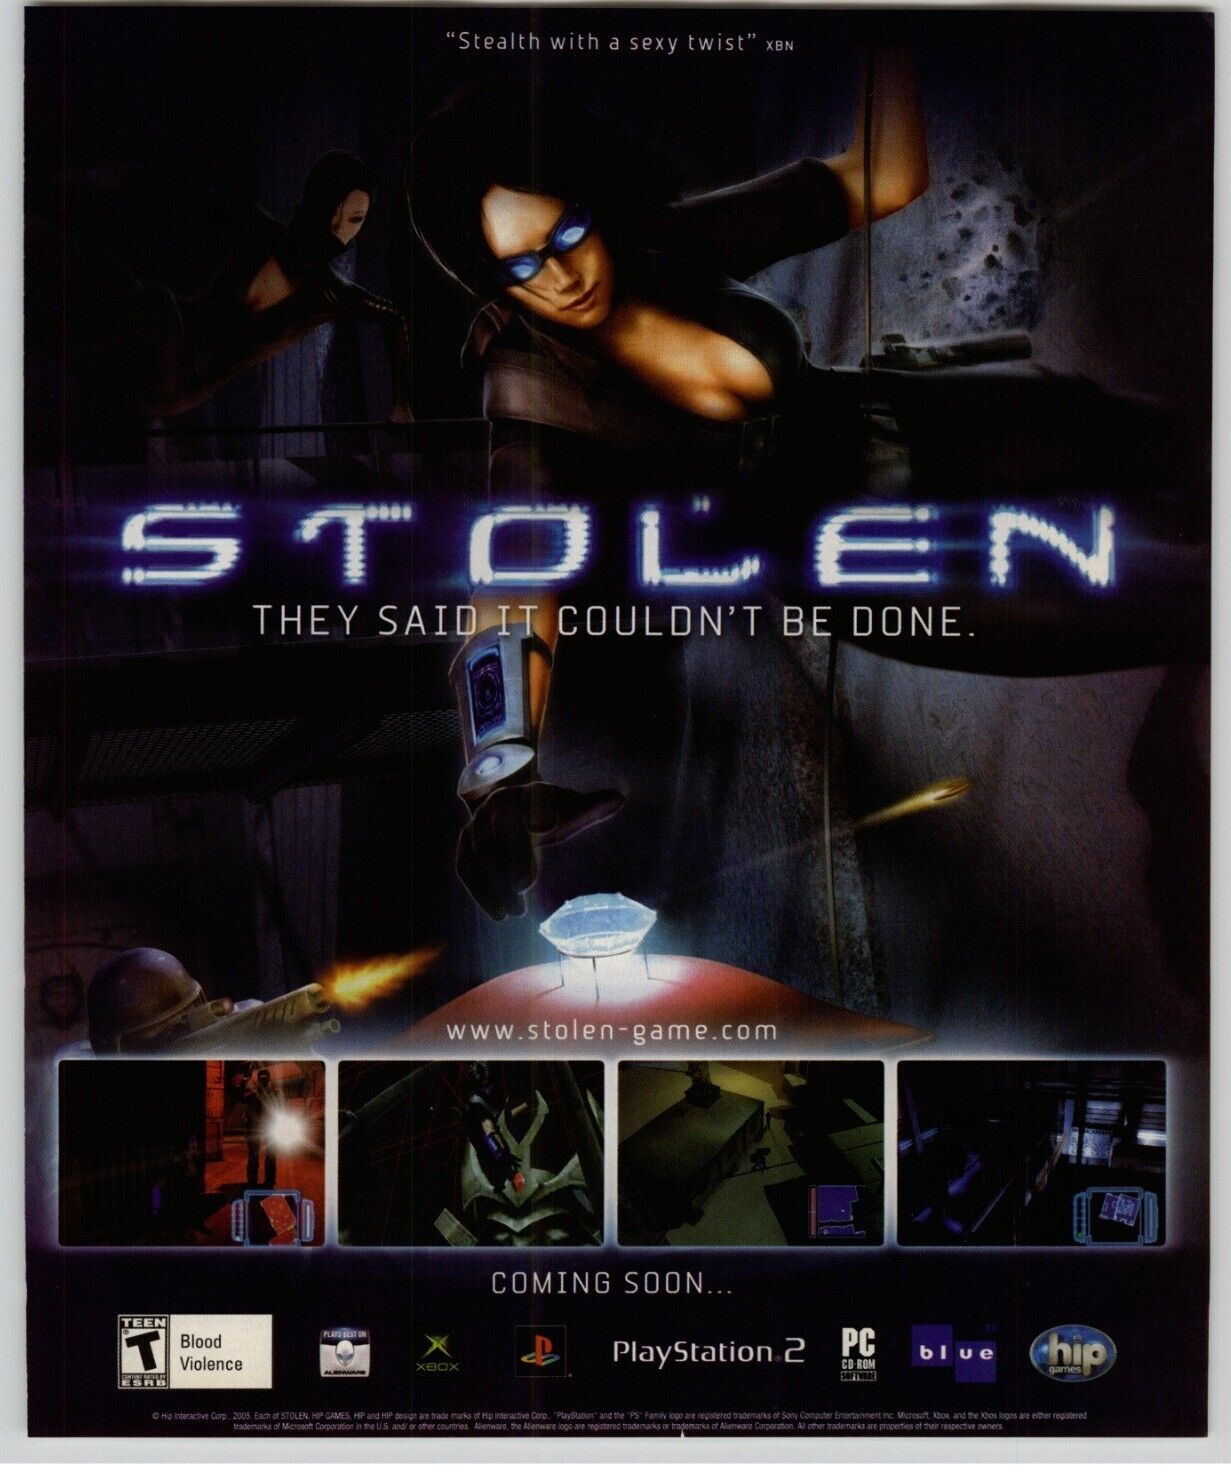 Stolen: PS2 PC Xbox Video Game Promo 2005 Vintage Print Ad/Poster Official Art